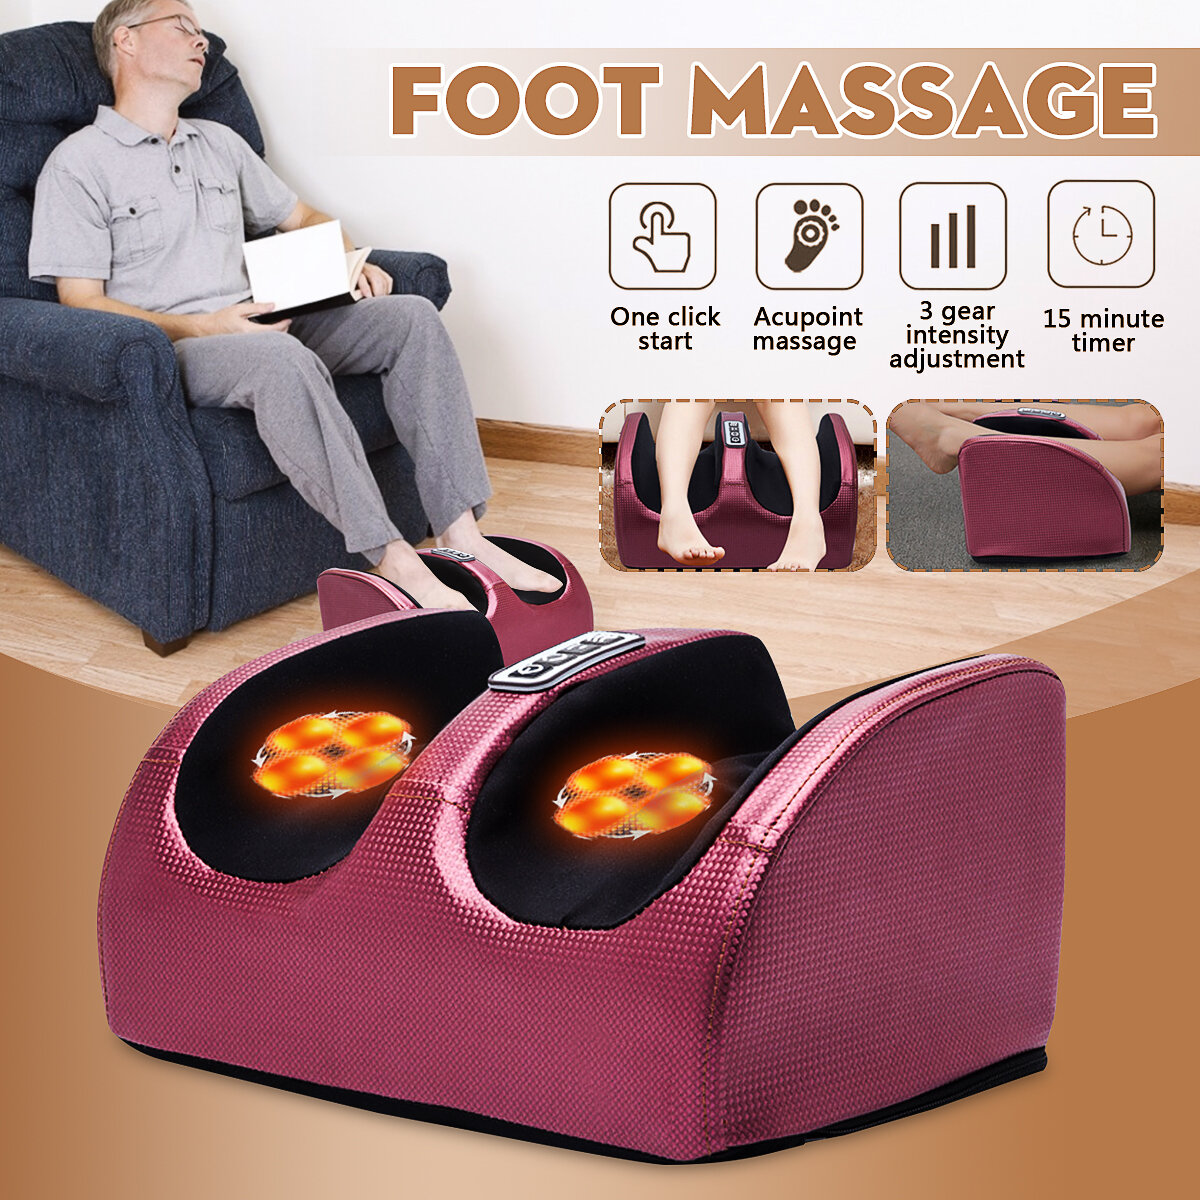 

Electric 24W Heating Foot Massager Machine Muscle Relaxation Leg Massager Kneading Blood Circulation Heat Therapy Massag